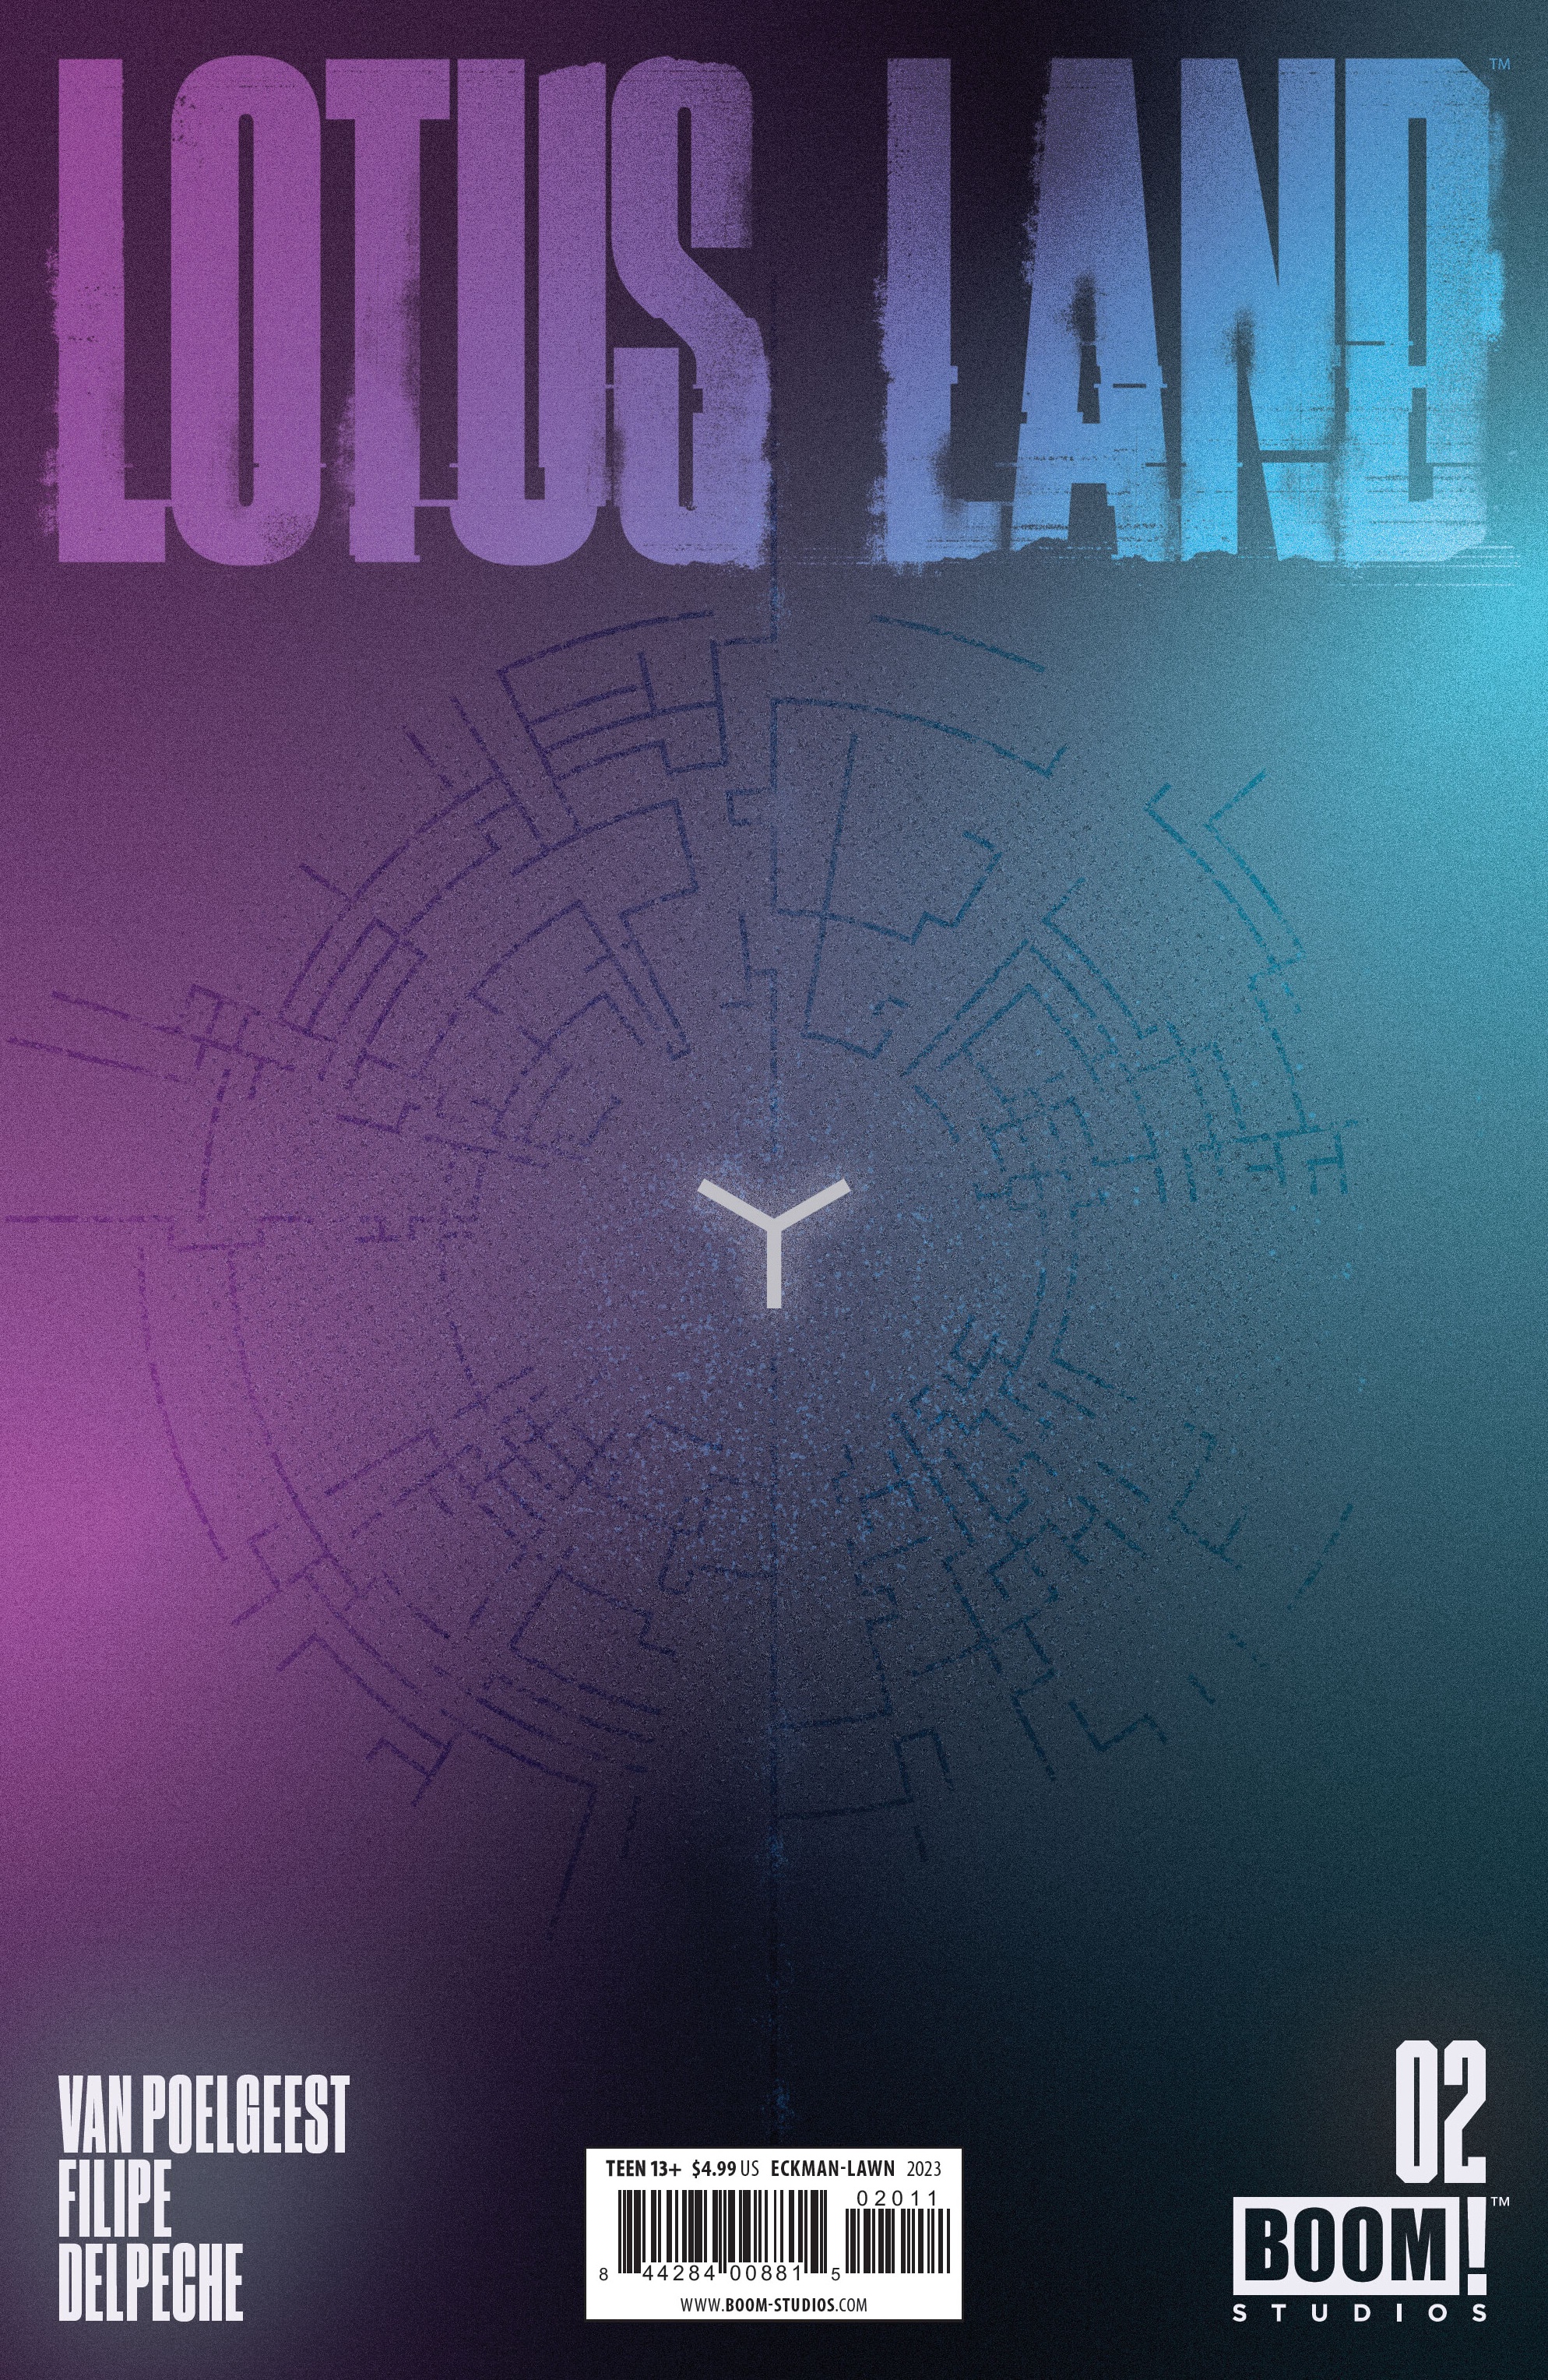 Read online Lotus Land comic -  Issue #2 - 34